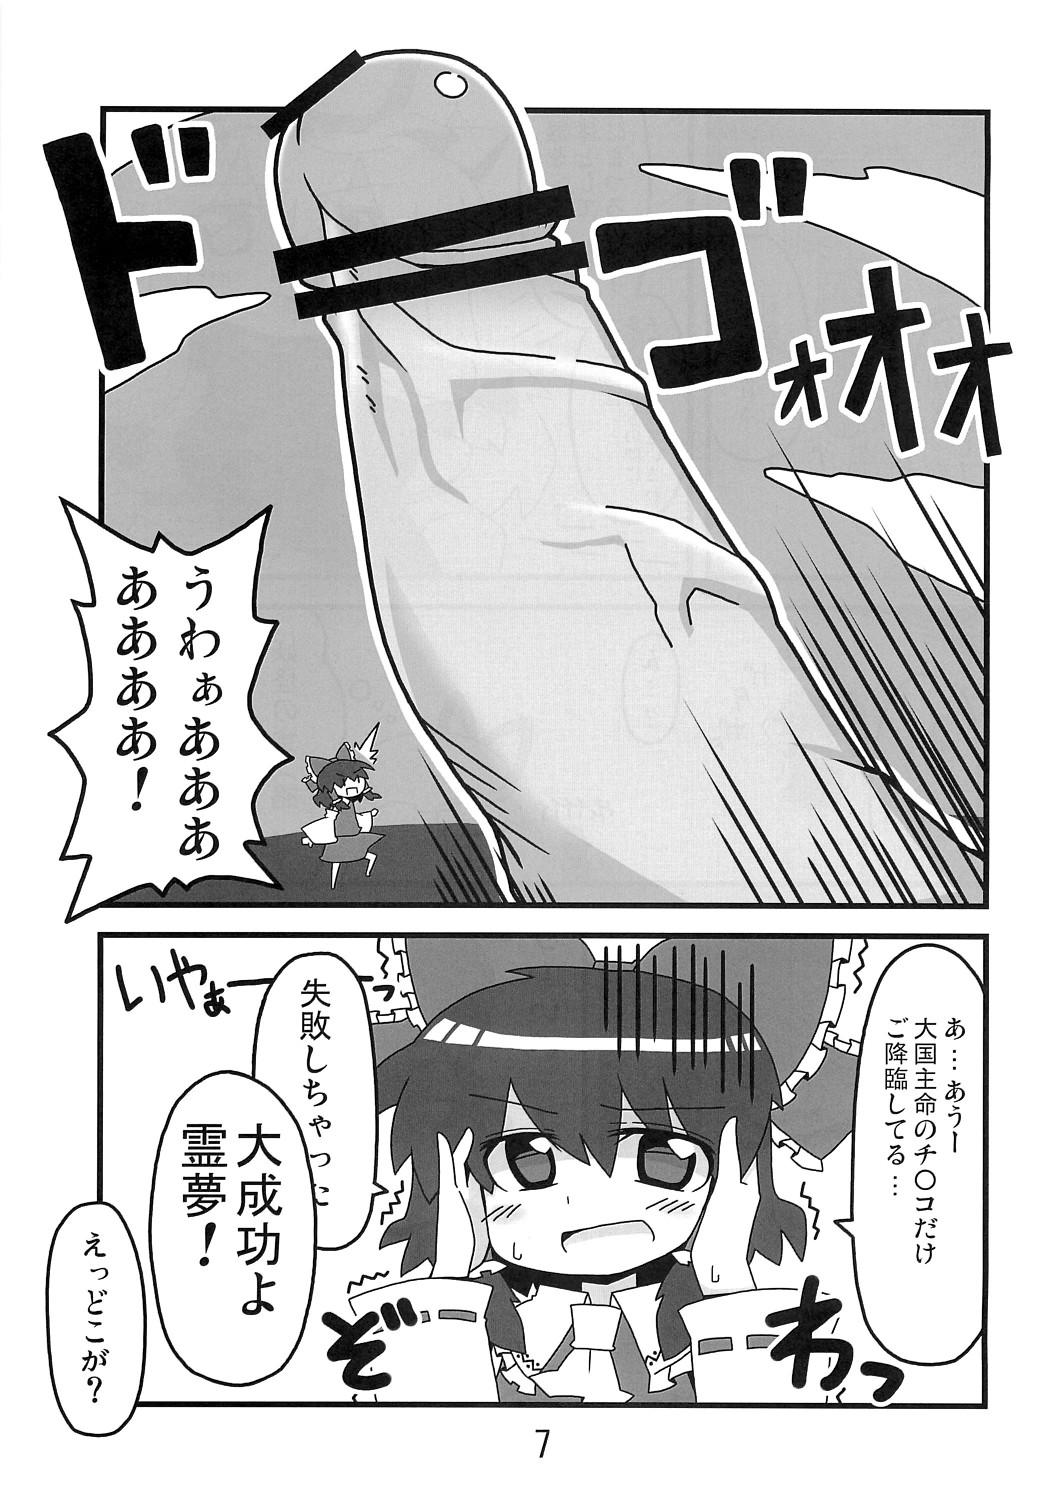 Tan 東方豊年祭 - Touhou project Amateurporn - Page 6